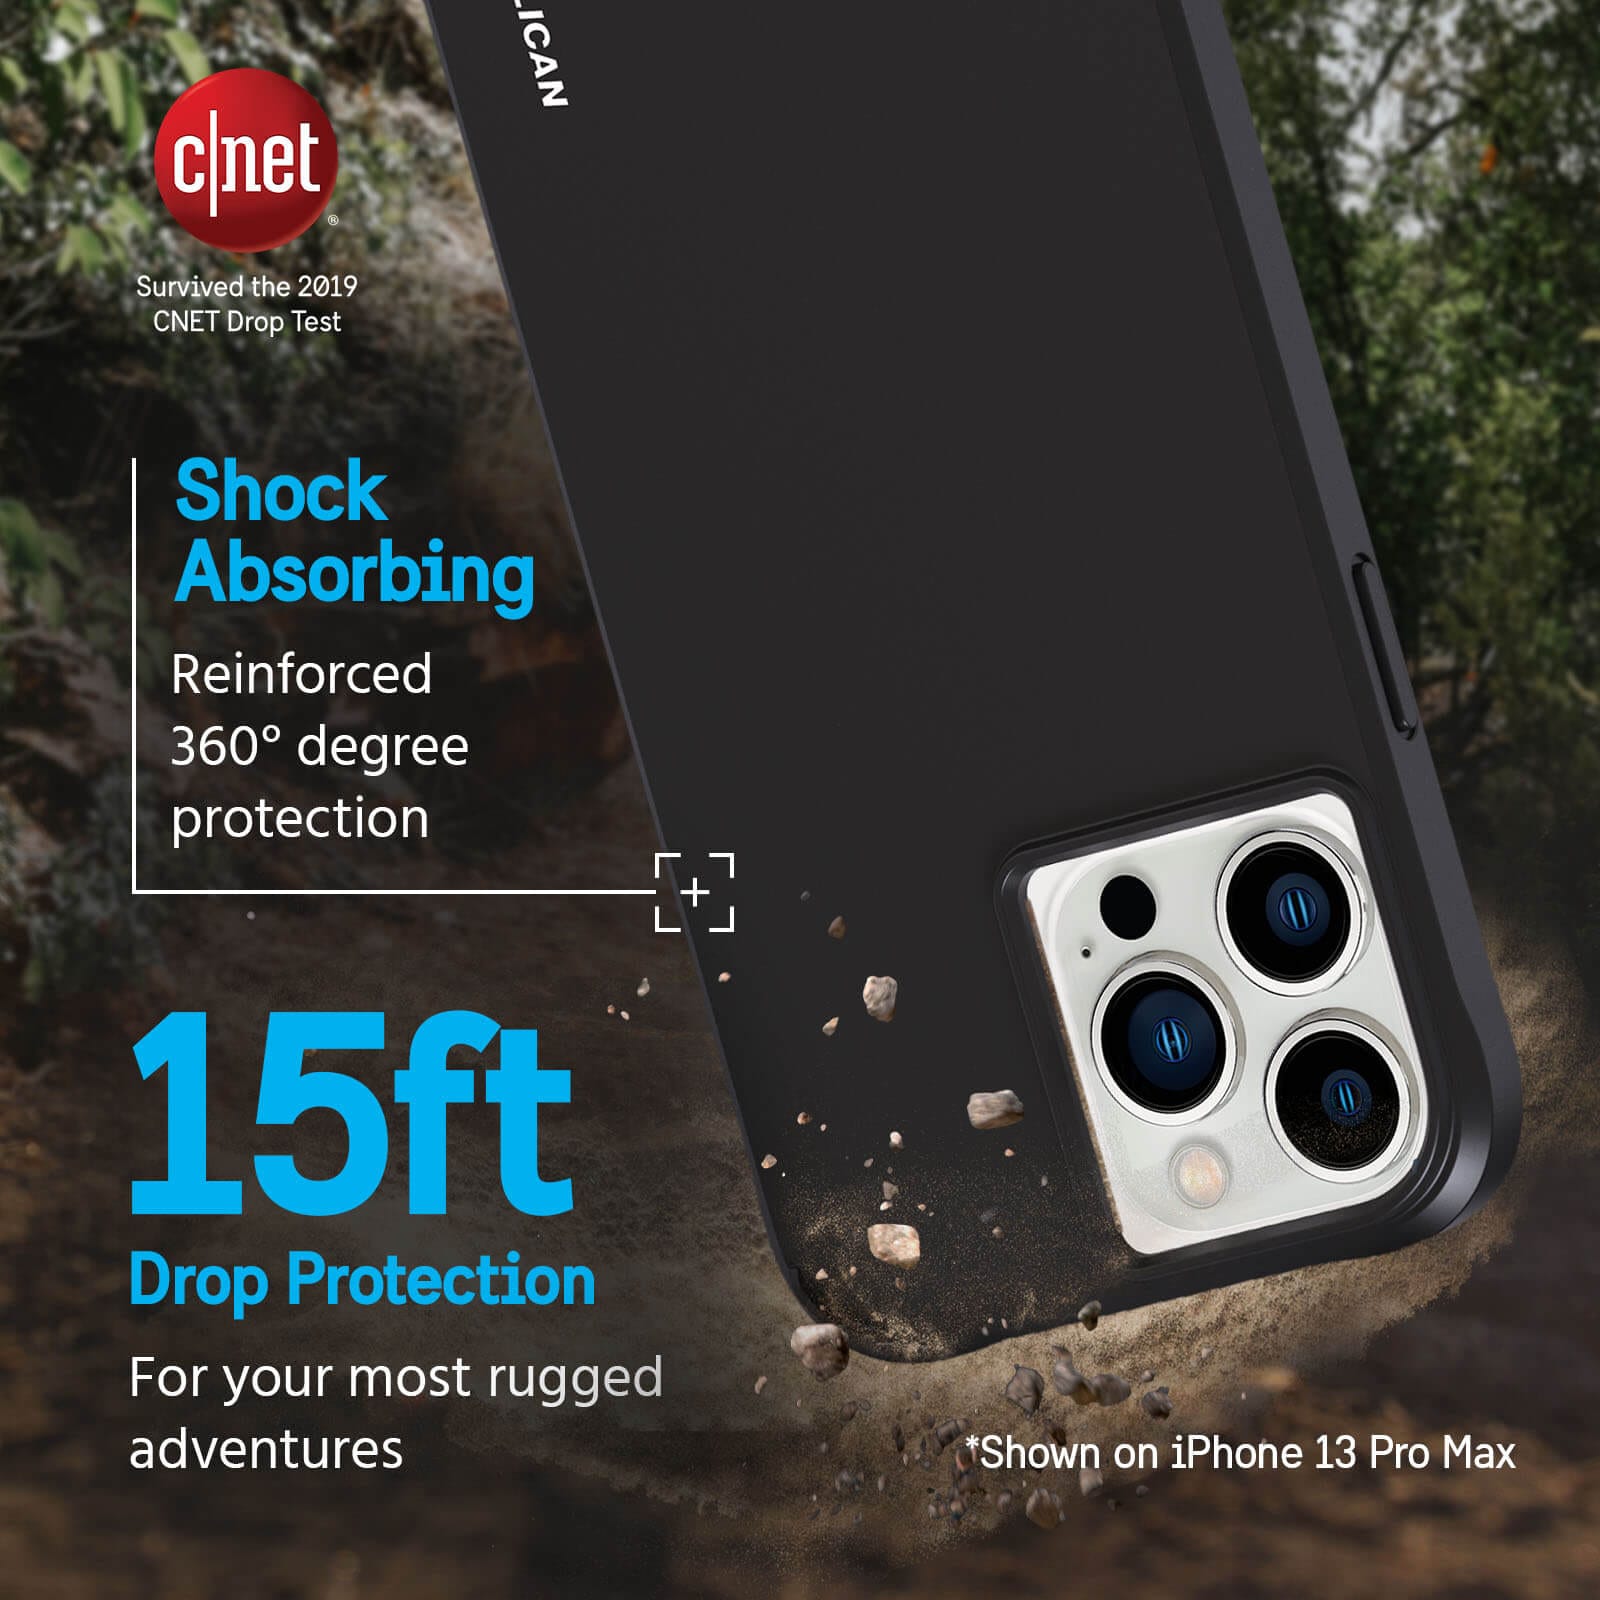 Survived the CNET Drop Test. Shock Absorbing Reinforced 360 degree protection. 15ft Drop Protection. For your most rugged adventures. *Shown on iPhone 13 Pro Max color::Black